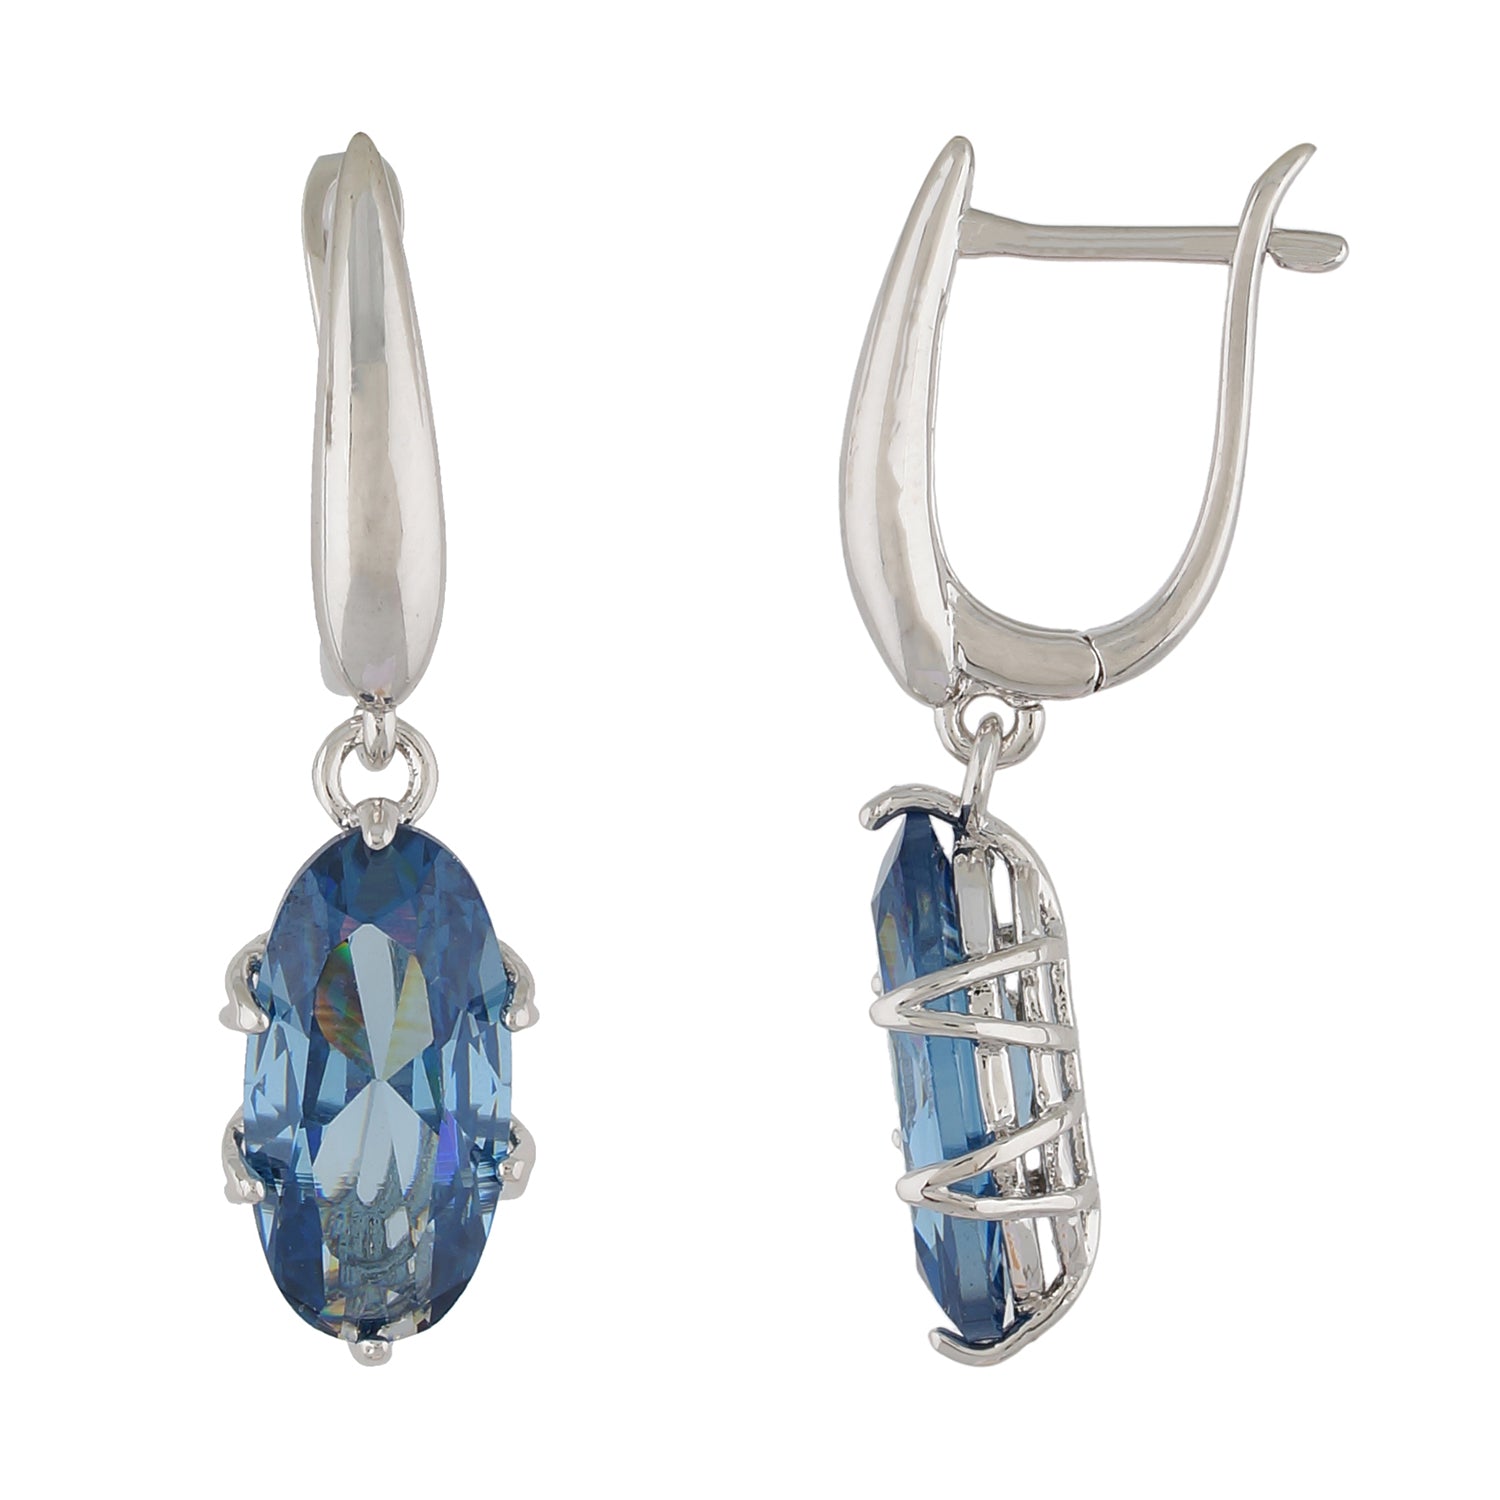 Impressive Blue and Silver Colour Oval Shape Earring for Girls and Women